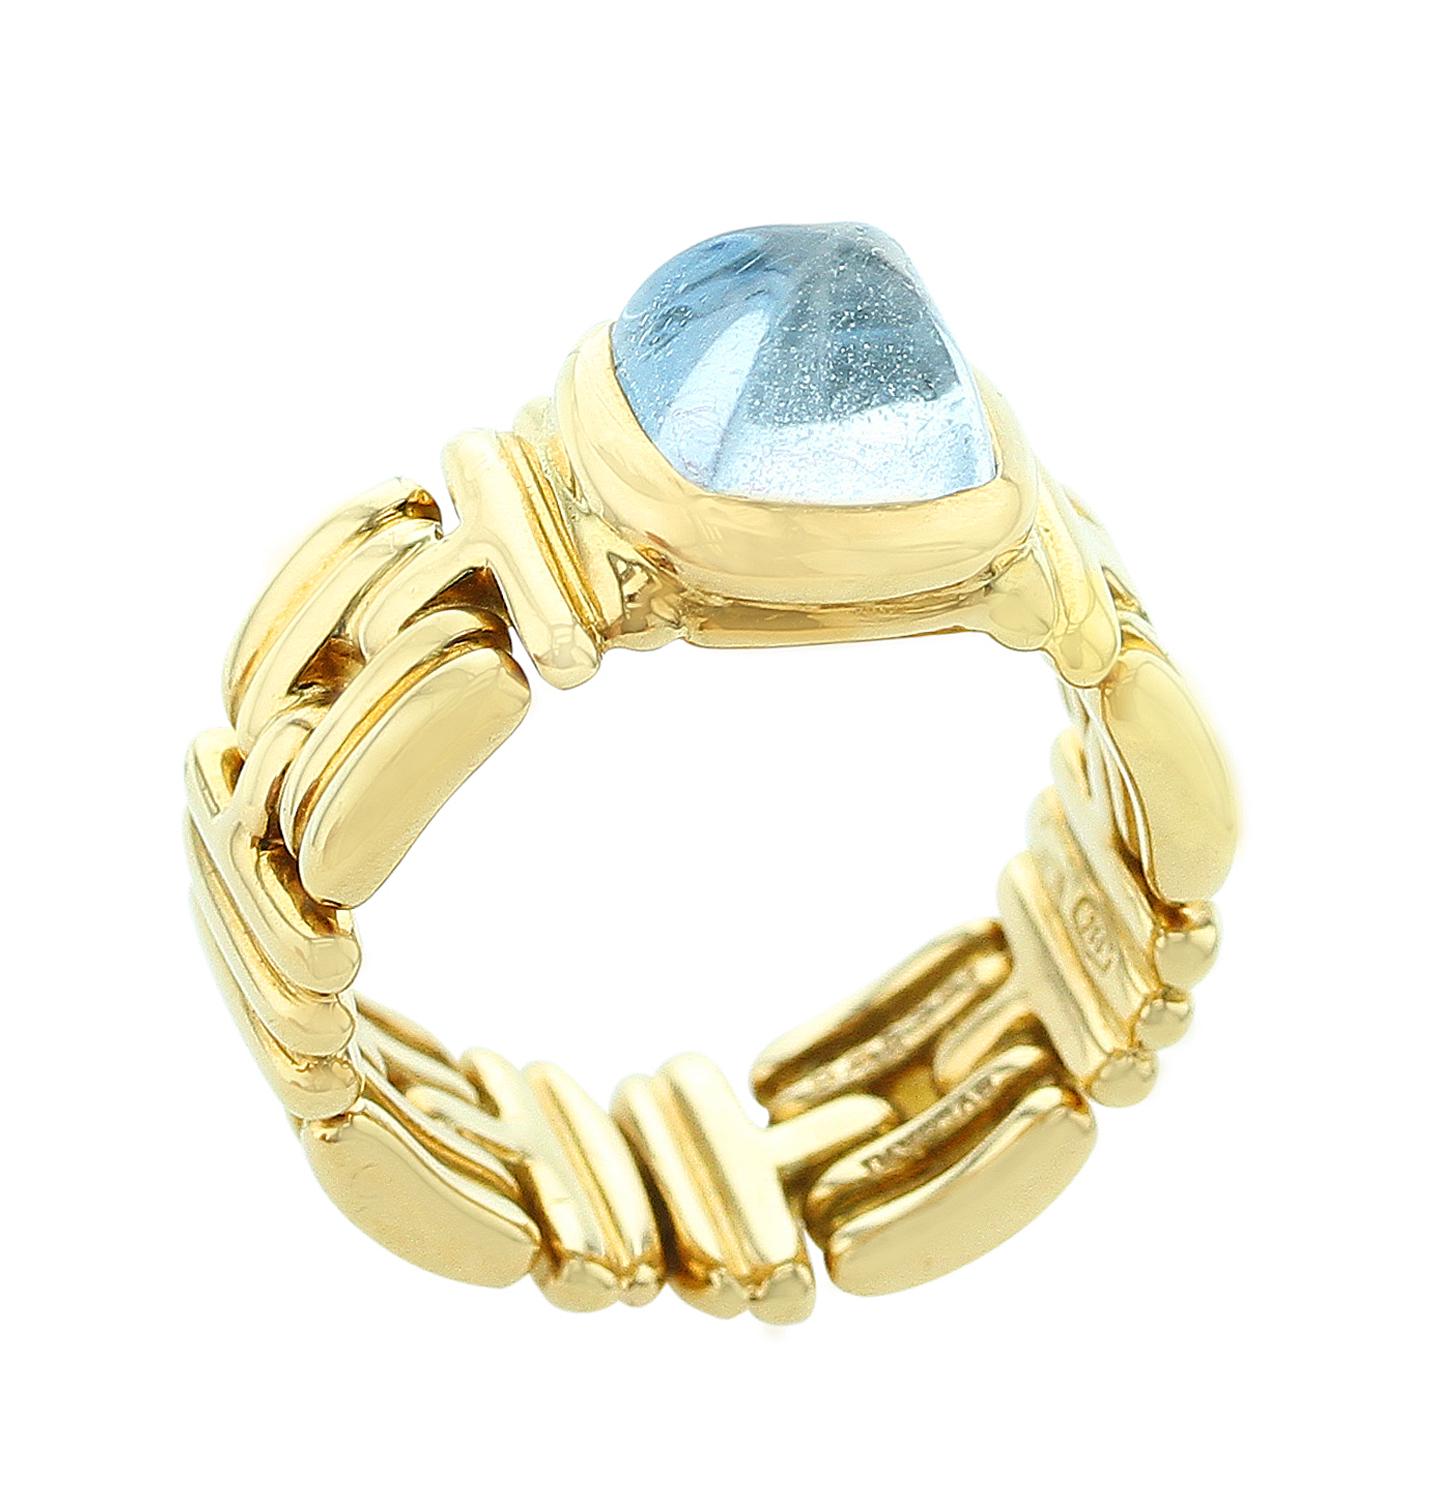 A square blue aquamarine cabochon set in a unique perpendicular pattern mounting style in 18K Yellow Gold. Signed Bvlgari. Ring Size US 6.25.